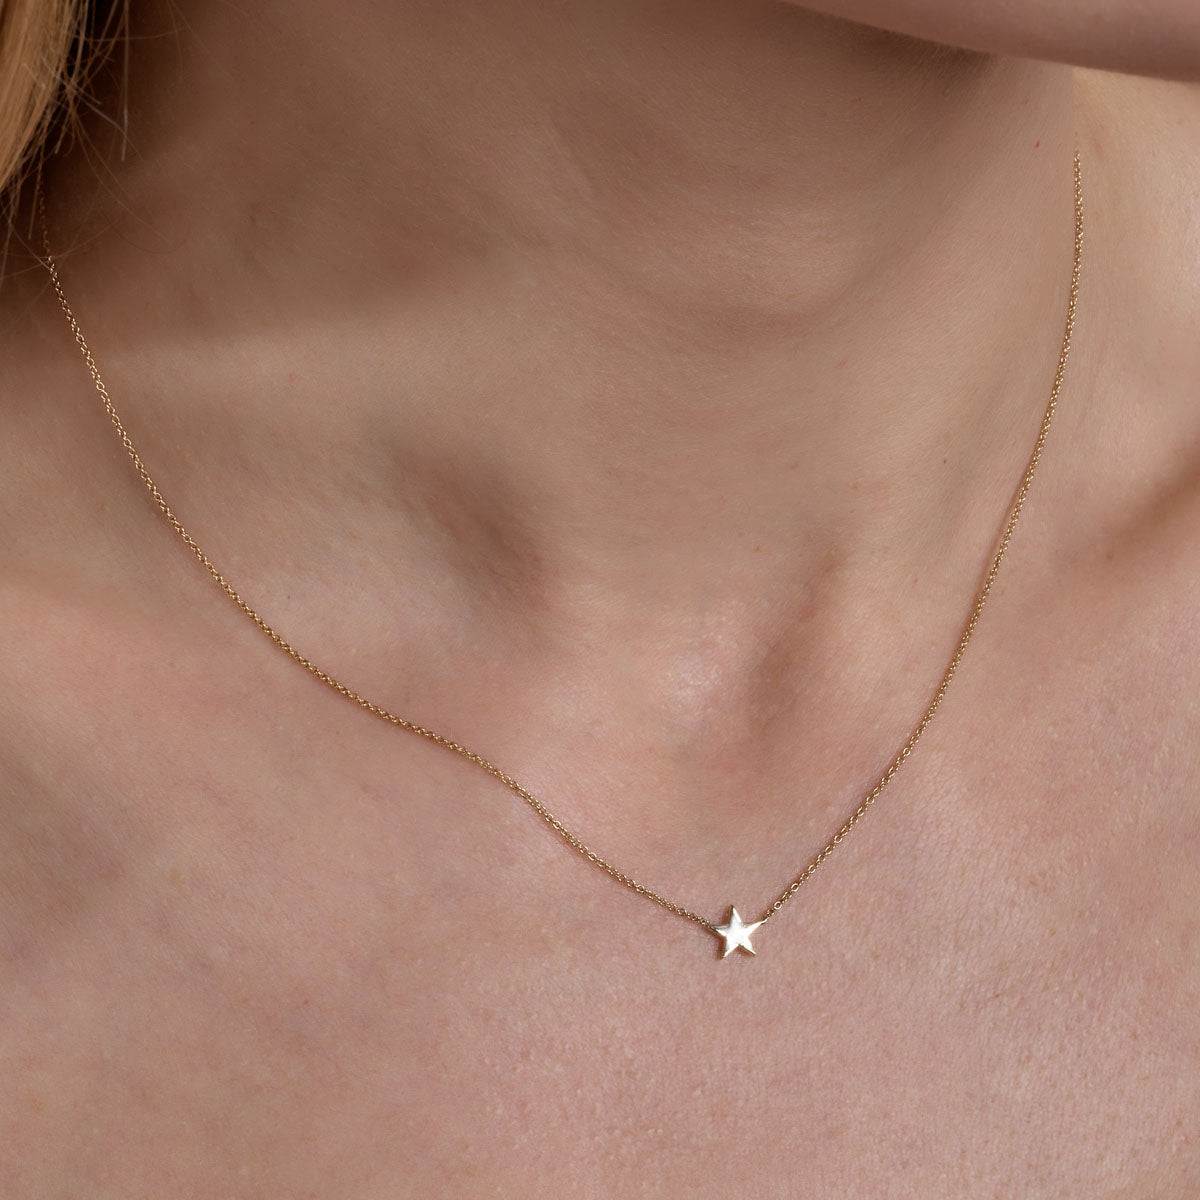 gold star necklace on womans neck